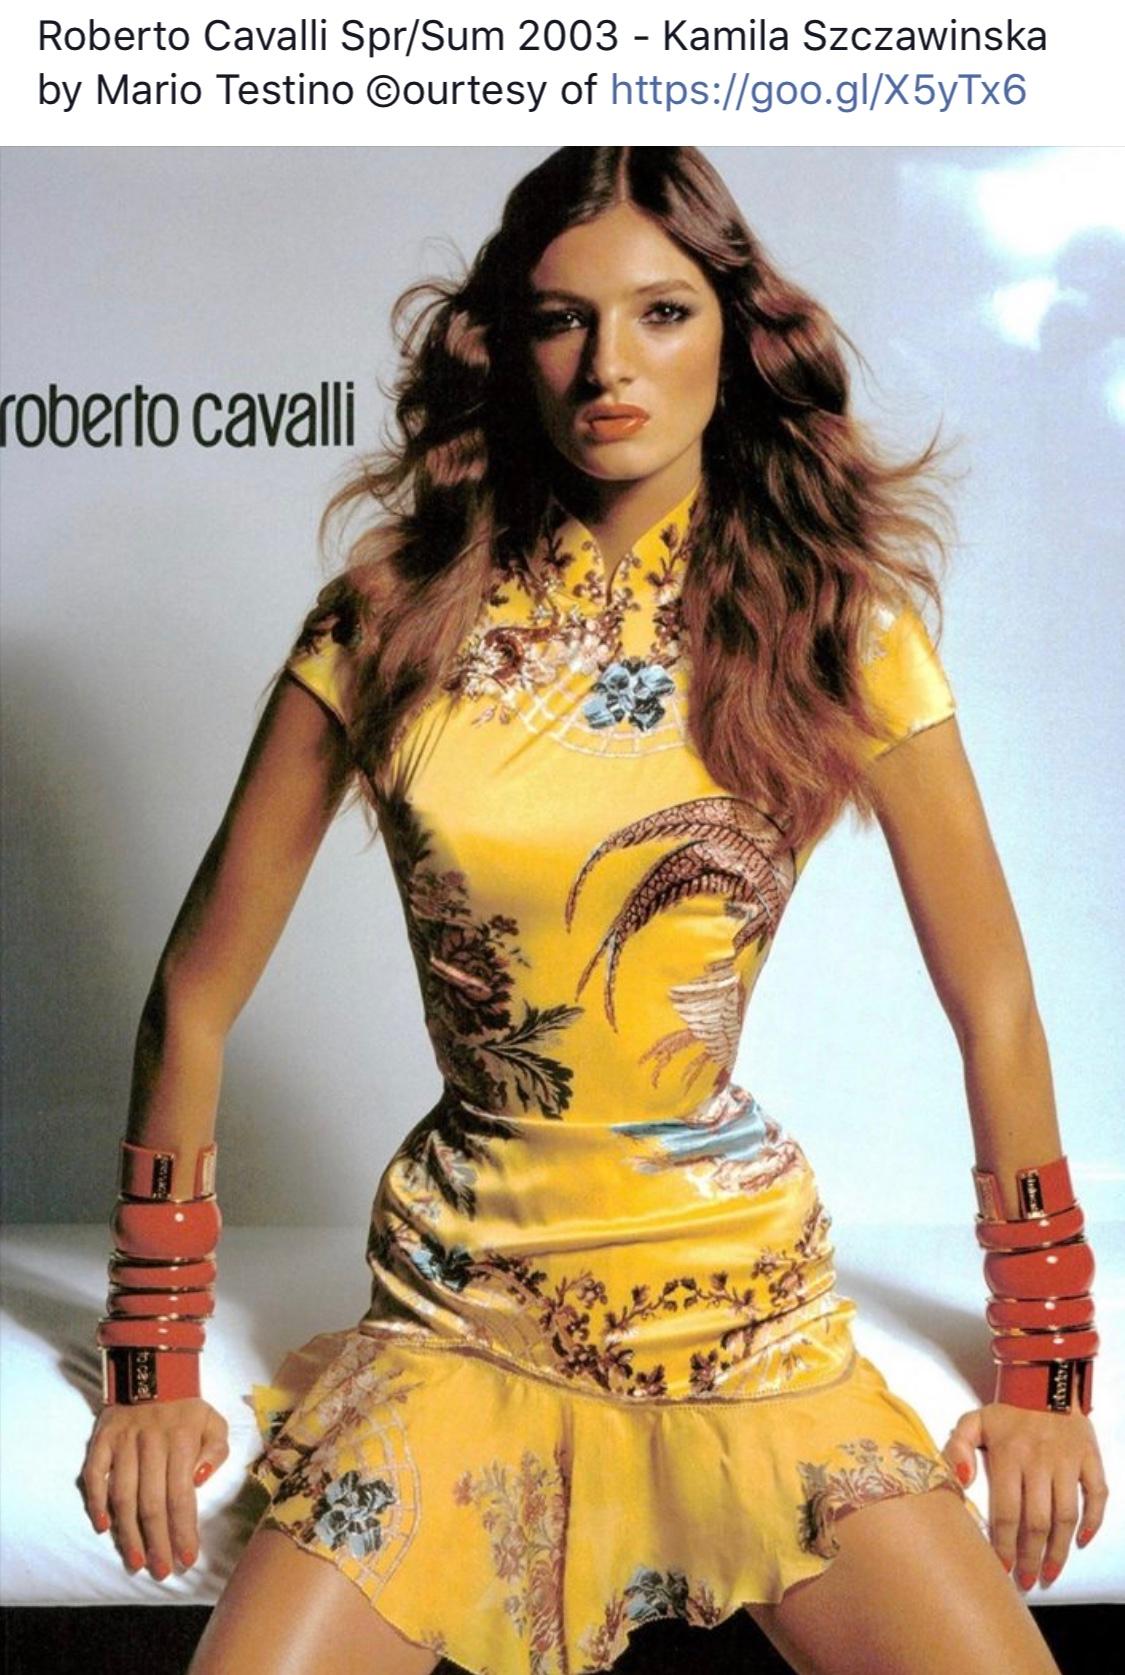 Roberto Cavalli Vintage Cheongsam Style Dress, from Spring 2003.
Ad campaign dress photographed by Mario Testino.
There a lot of stretch . One of the eye on the hook and eye closures is missing.

Size S

Bust 36